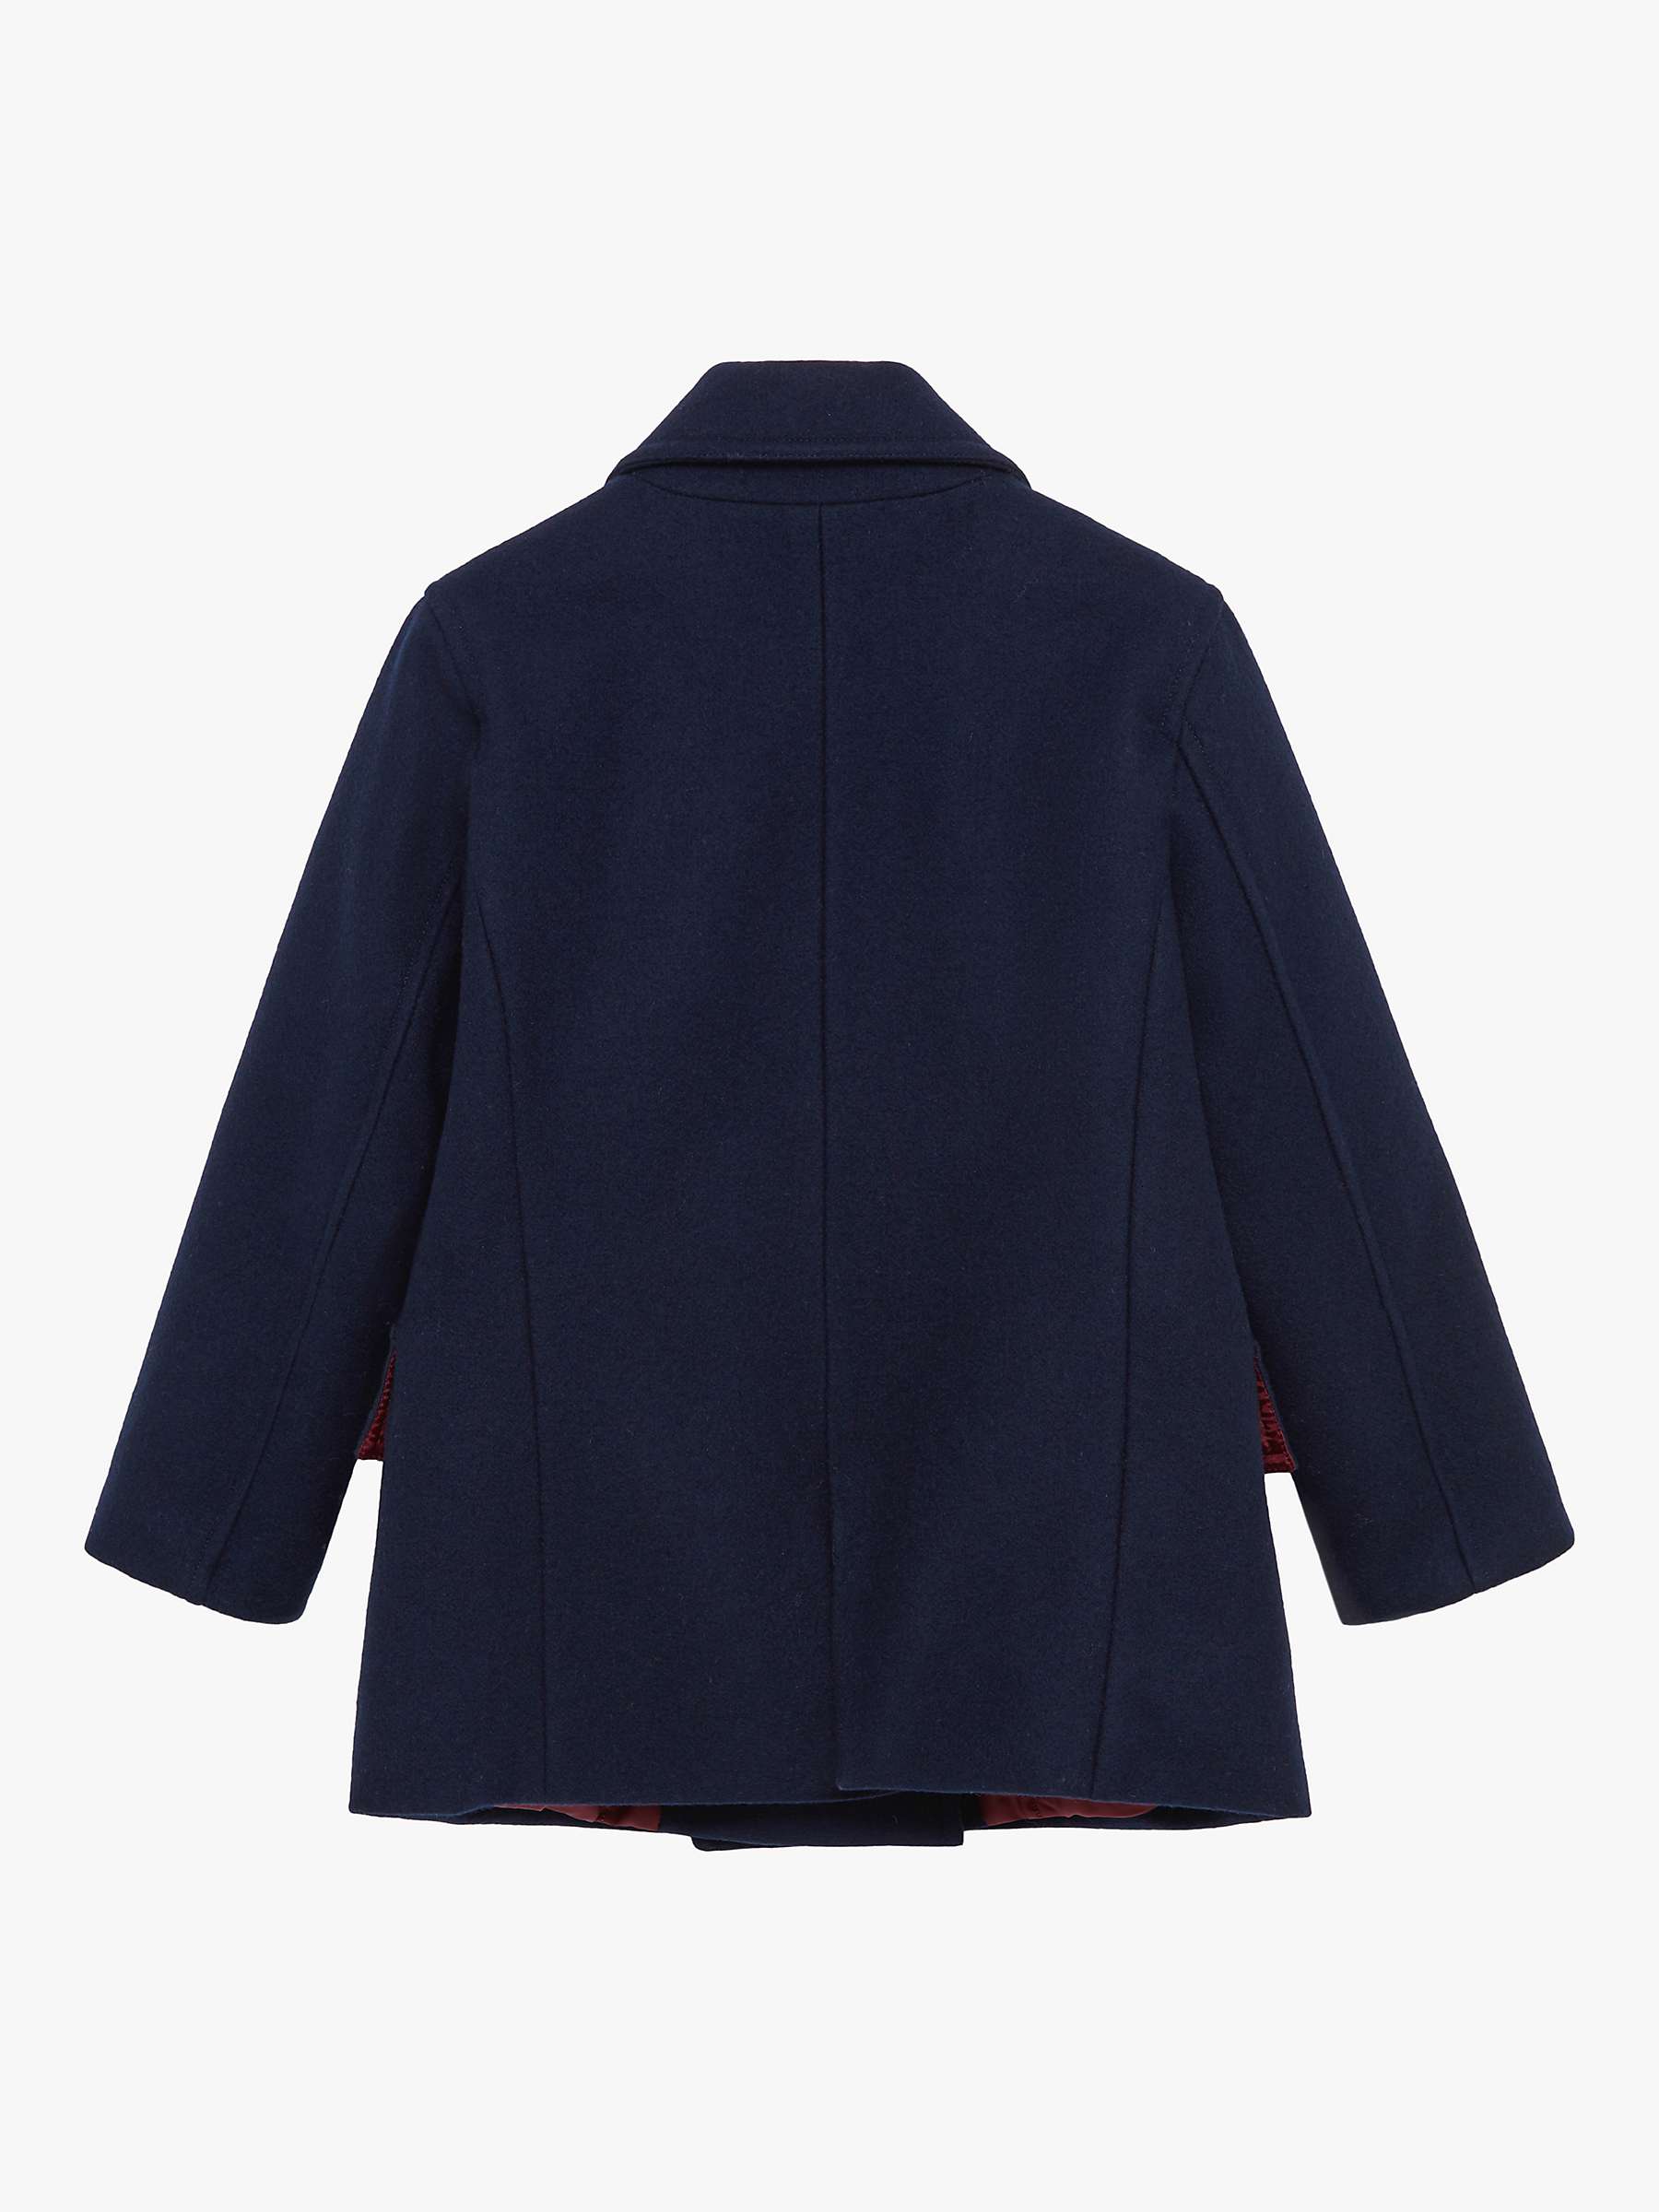 Buy Trotters Kids' Double Breasted Wool Coat, Navy Online at johnlewis.com